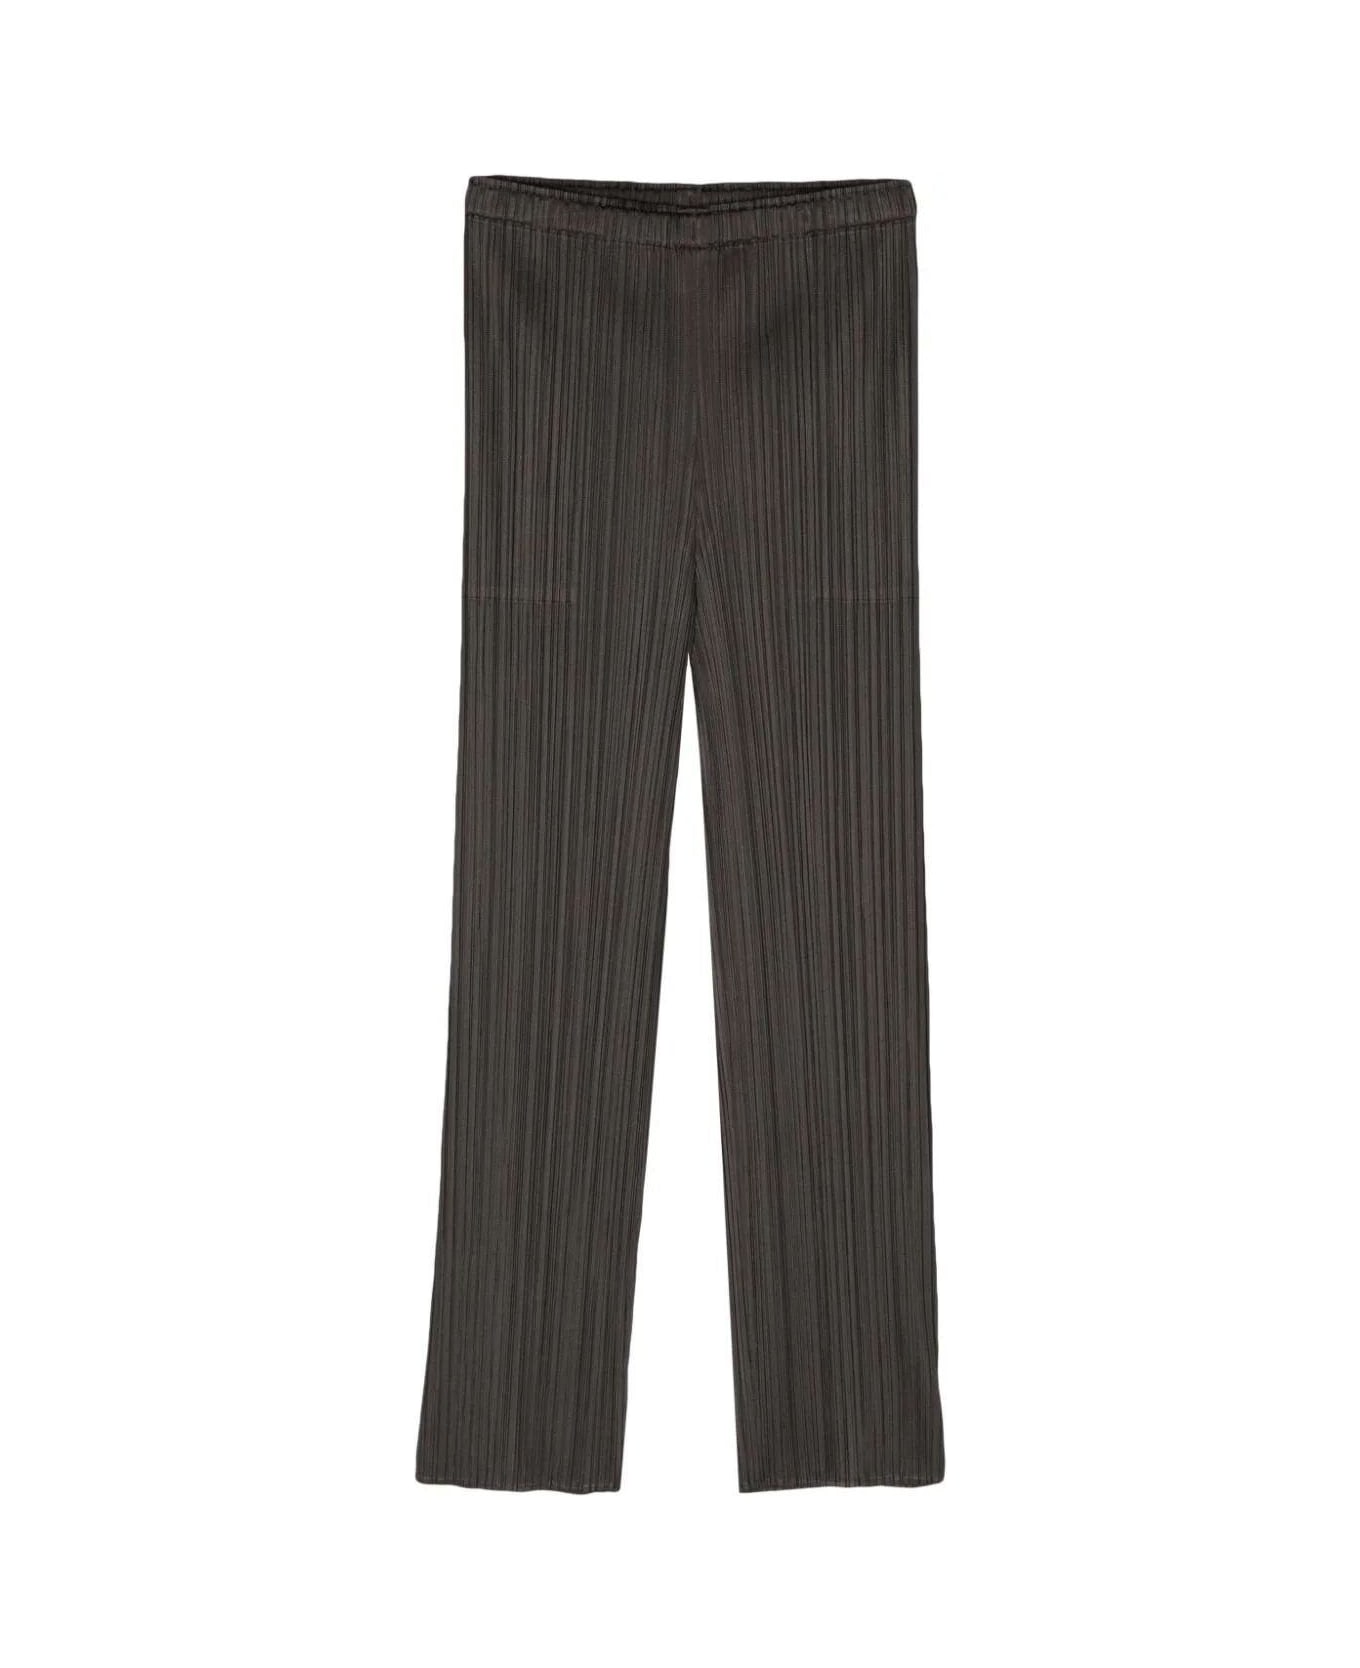 Pleats Please Issey Miyake January Pleated Cropped Trousers - Charcoal Gray